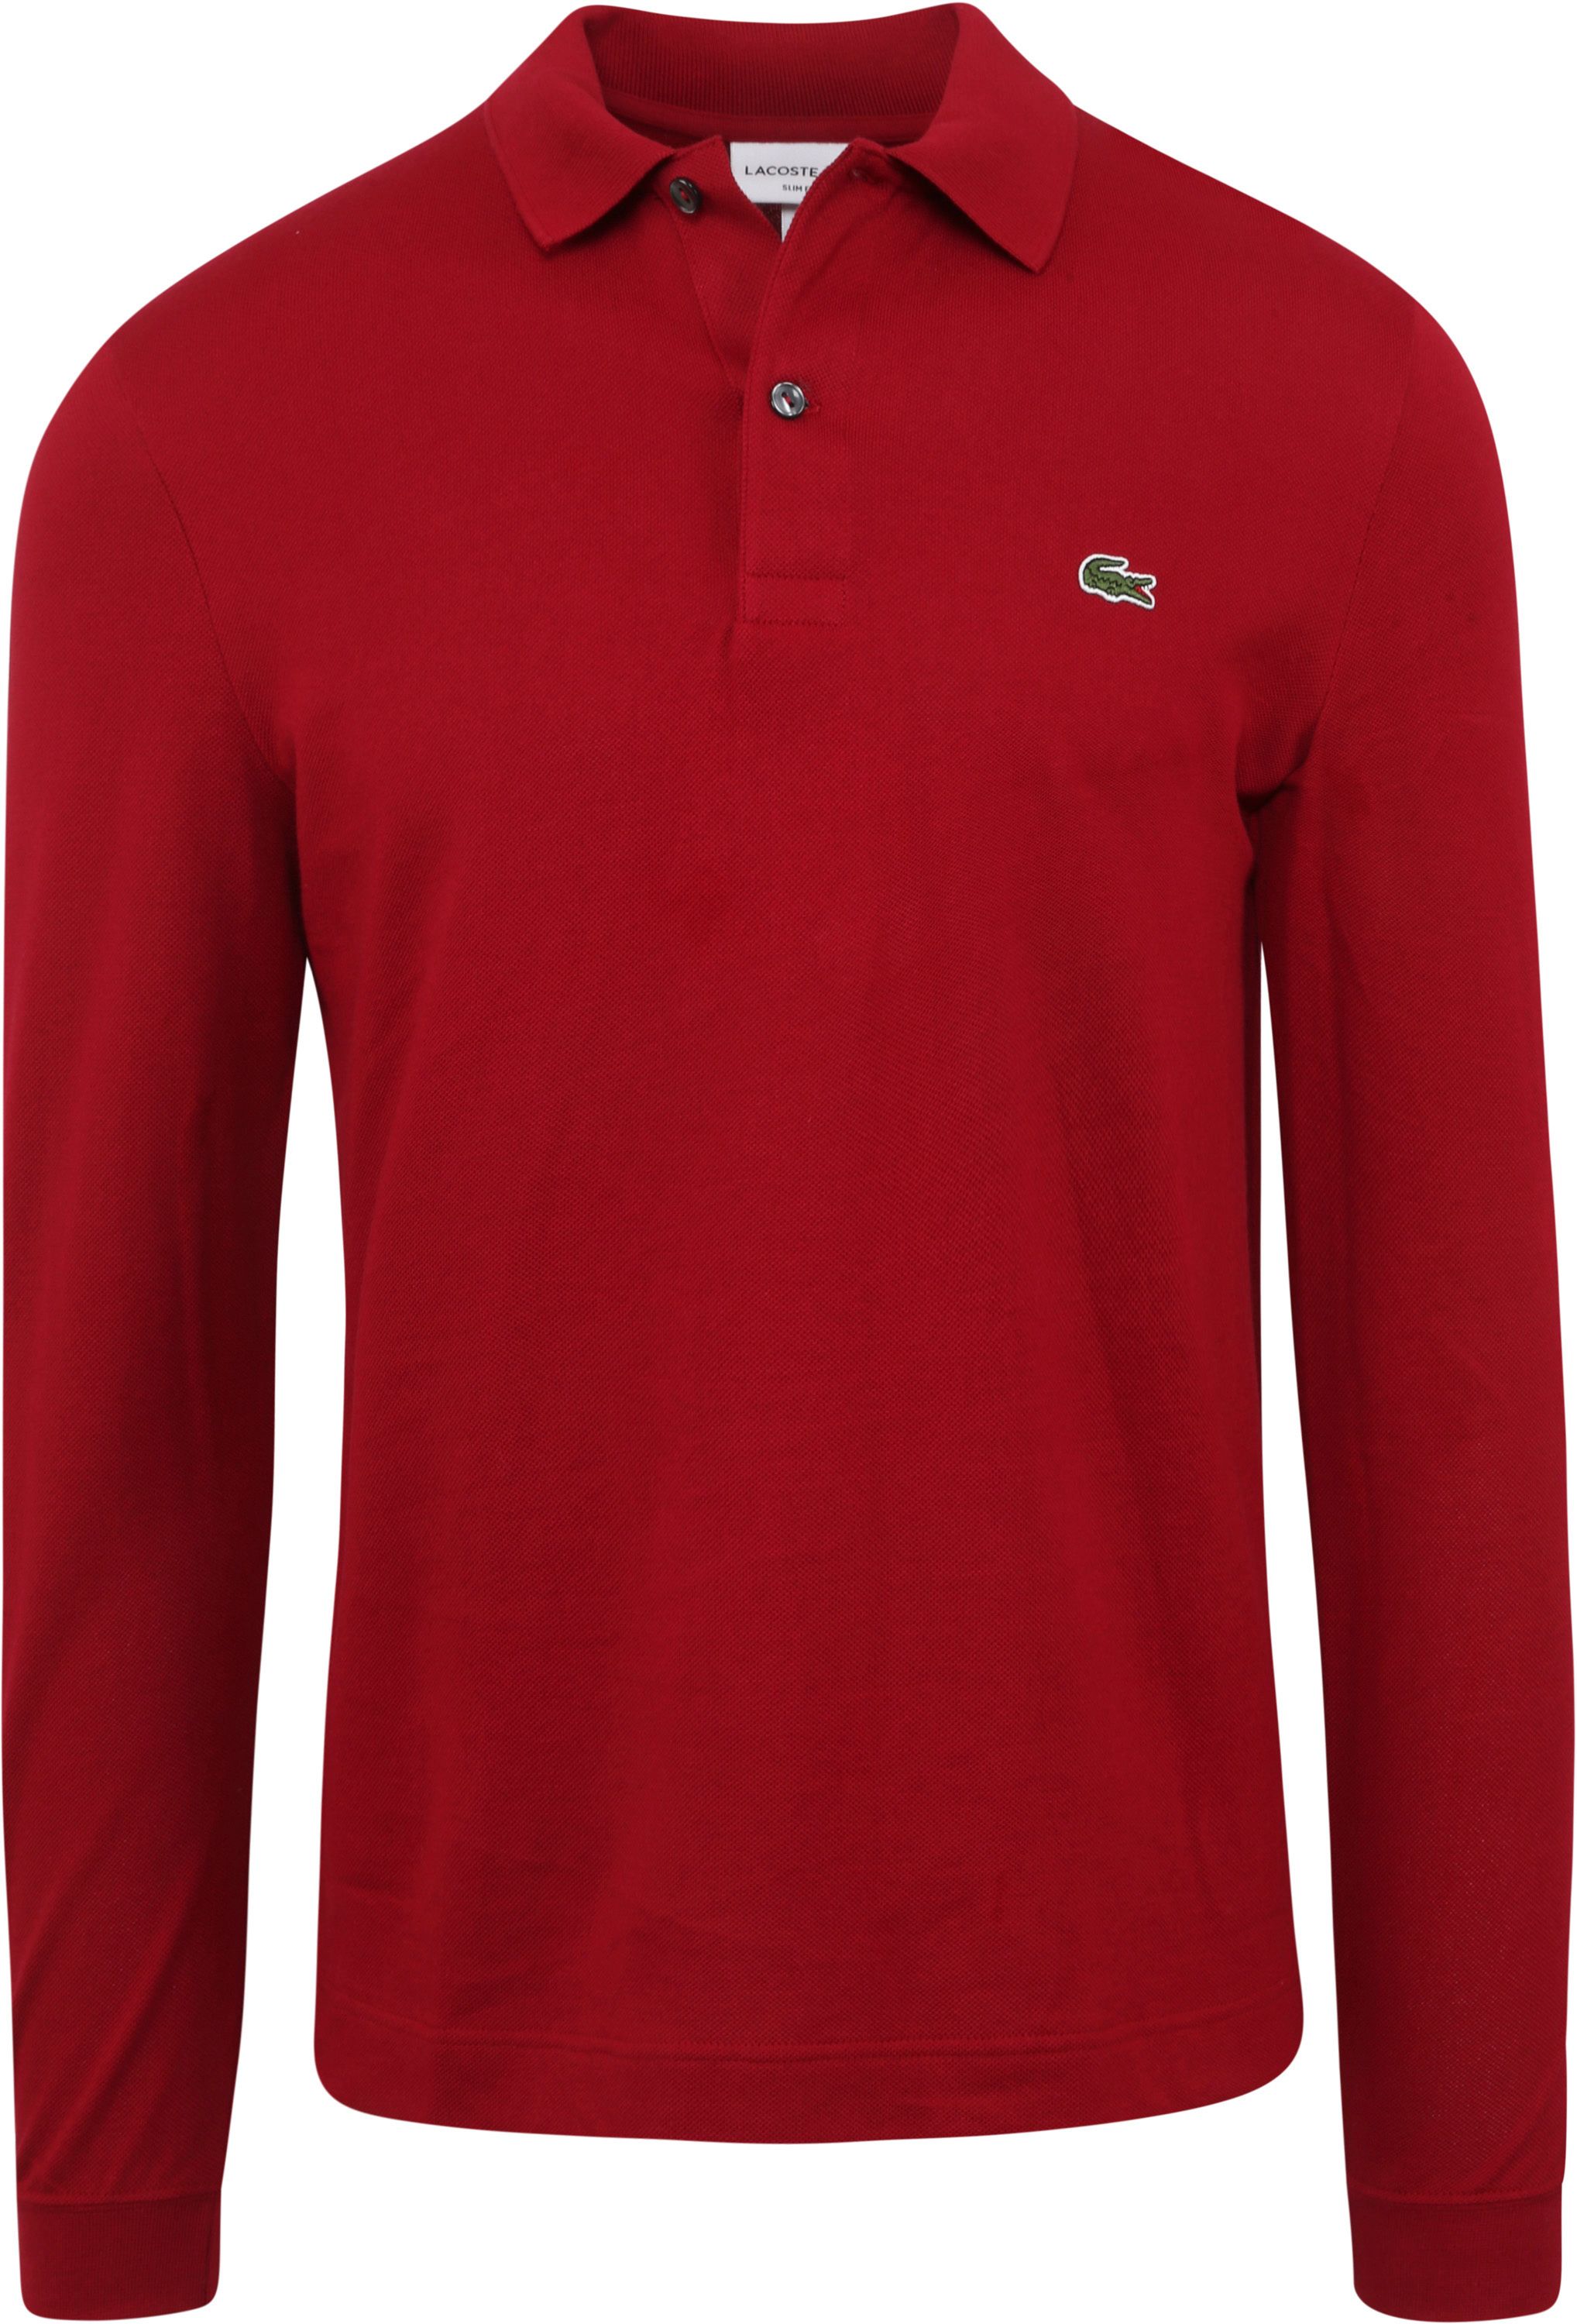 Lacoste Long-sleeved polo shirt Bordeaux Burgundy Red size L